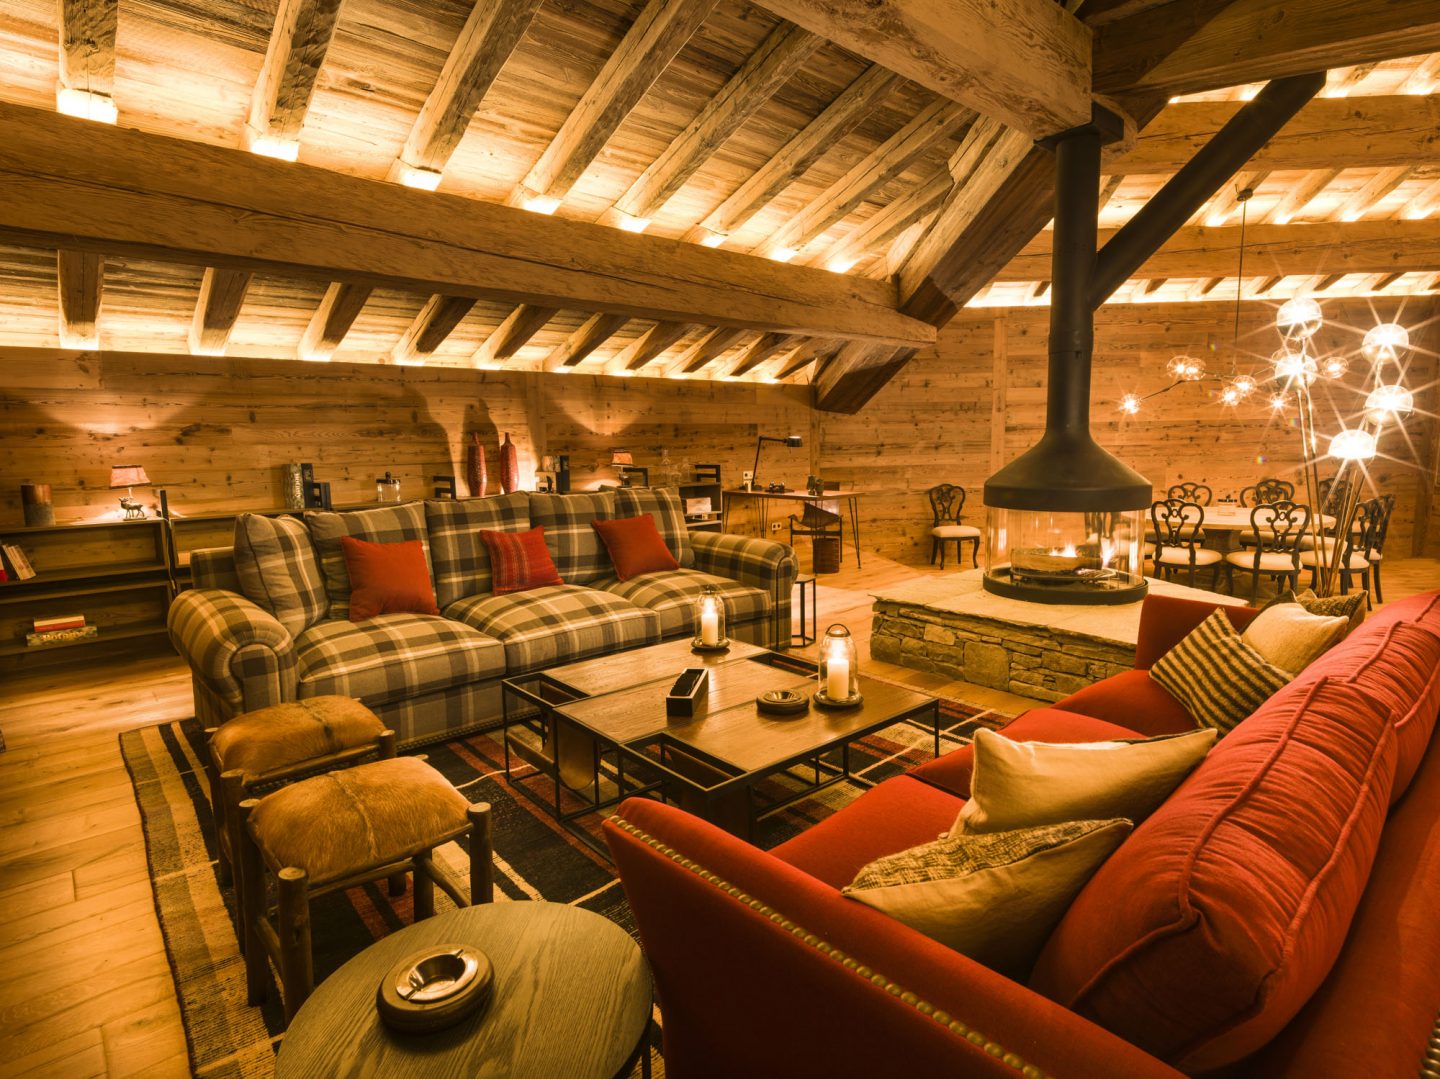 Large sofas and fireplace in romantic French chalet